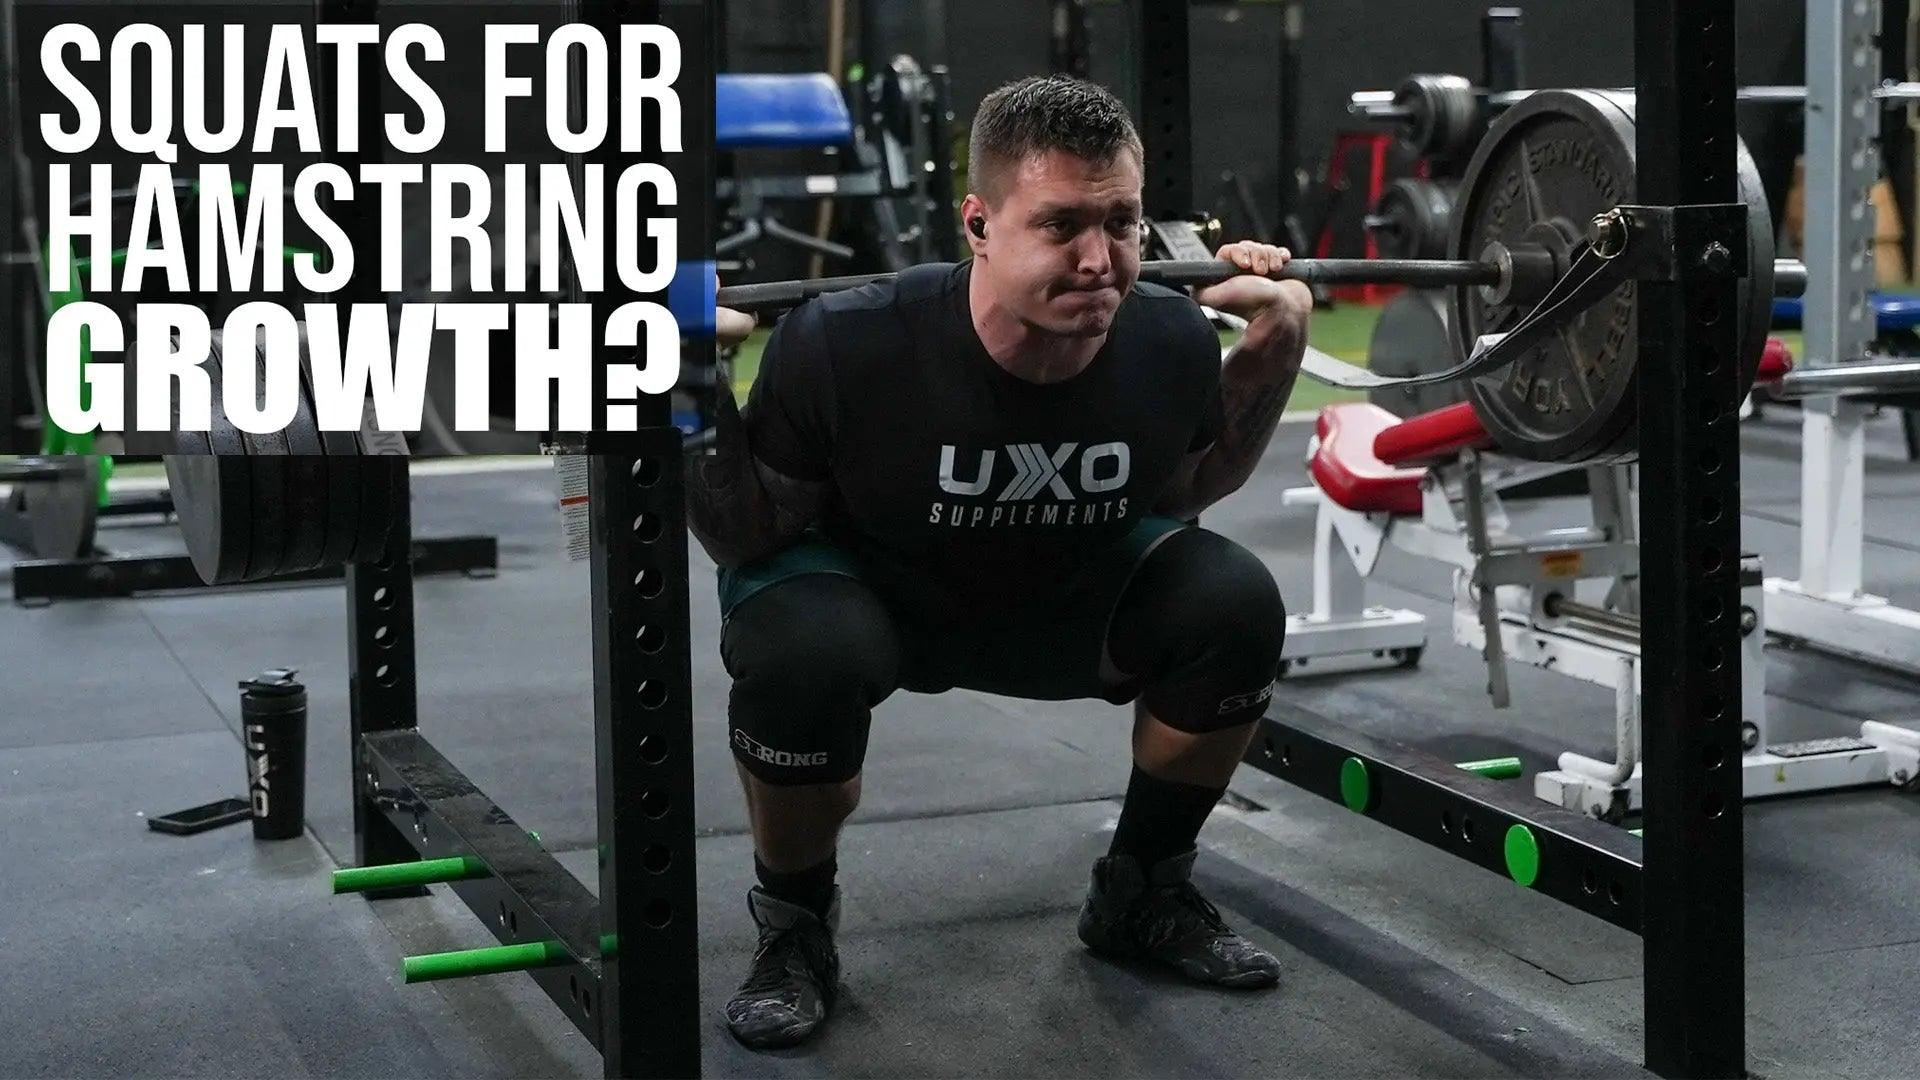 Squats-for-Hamstring-Growth UXO Supplements